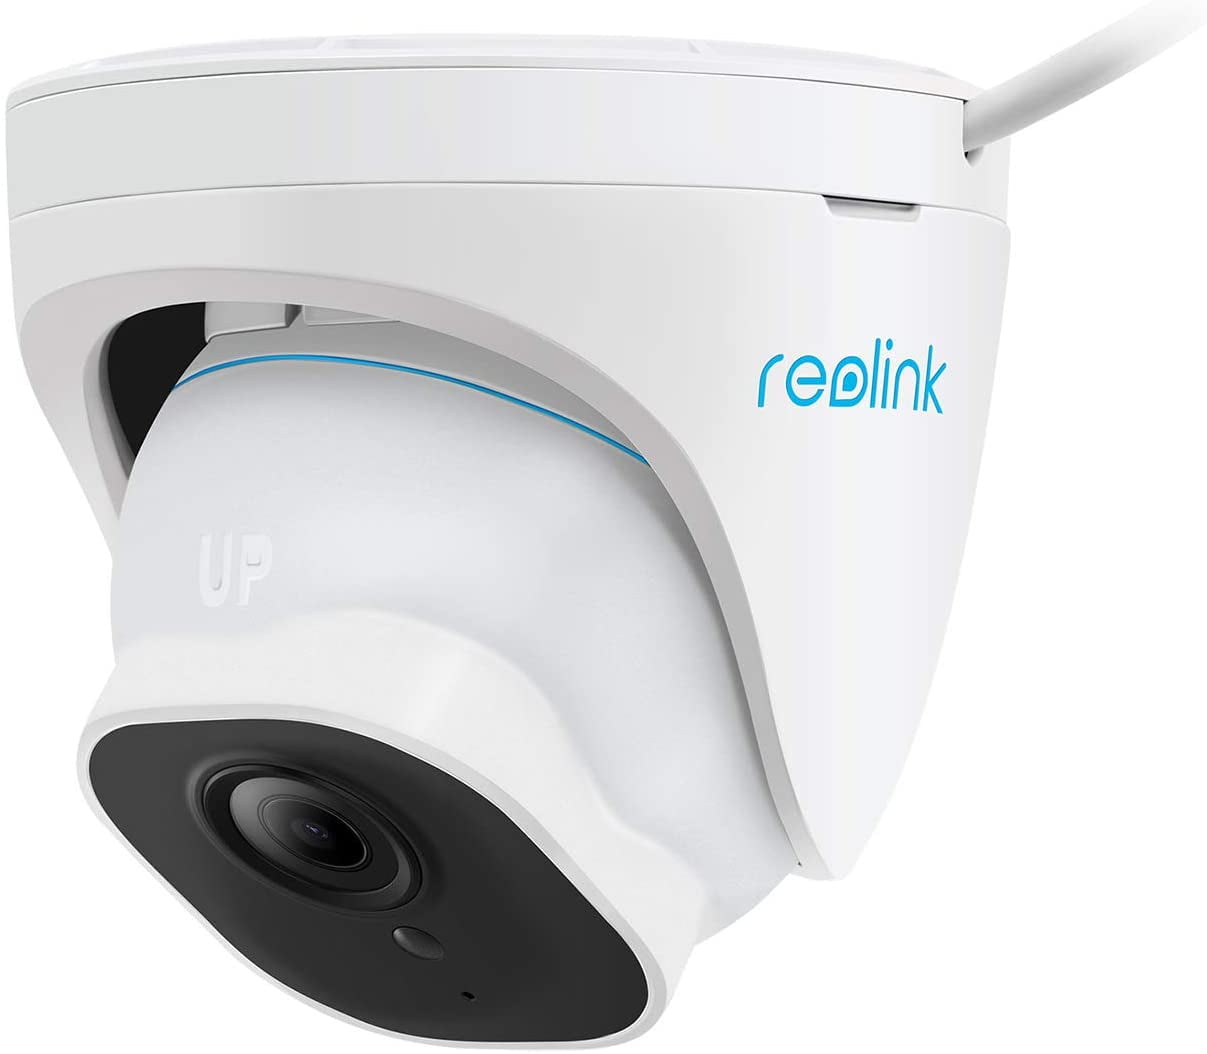 Reolink 4MP Dual-Lens Outdoor Home Security PoE Surveillance Camera,  150°Wild Angle, Smart Human/Vehicle Detection, Motion Spotlights, Color  Night Vision, Two Way Talk, Duo PoE 